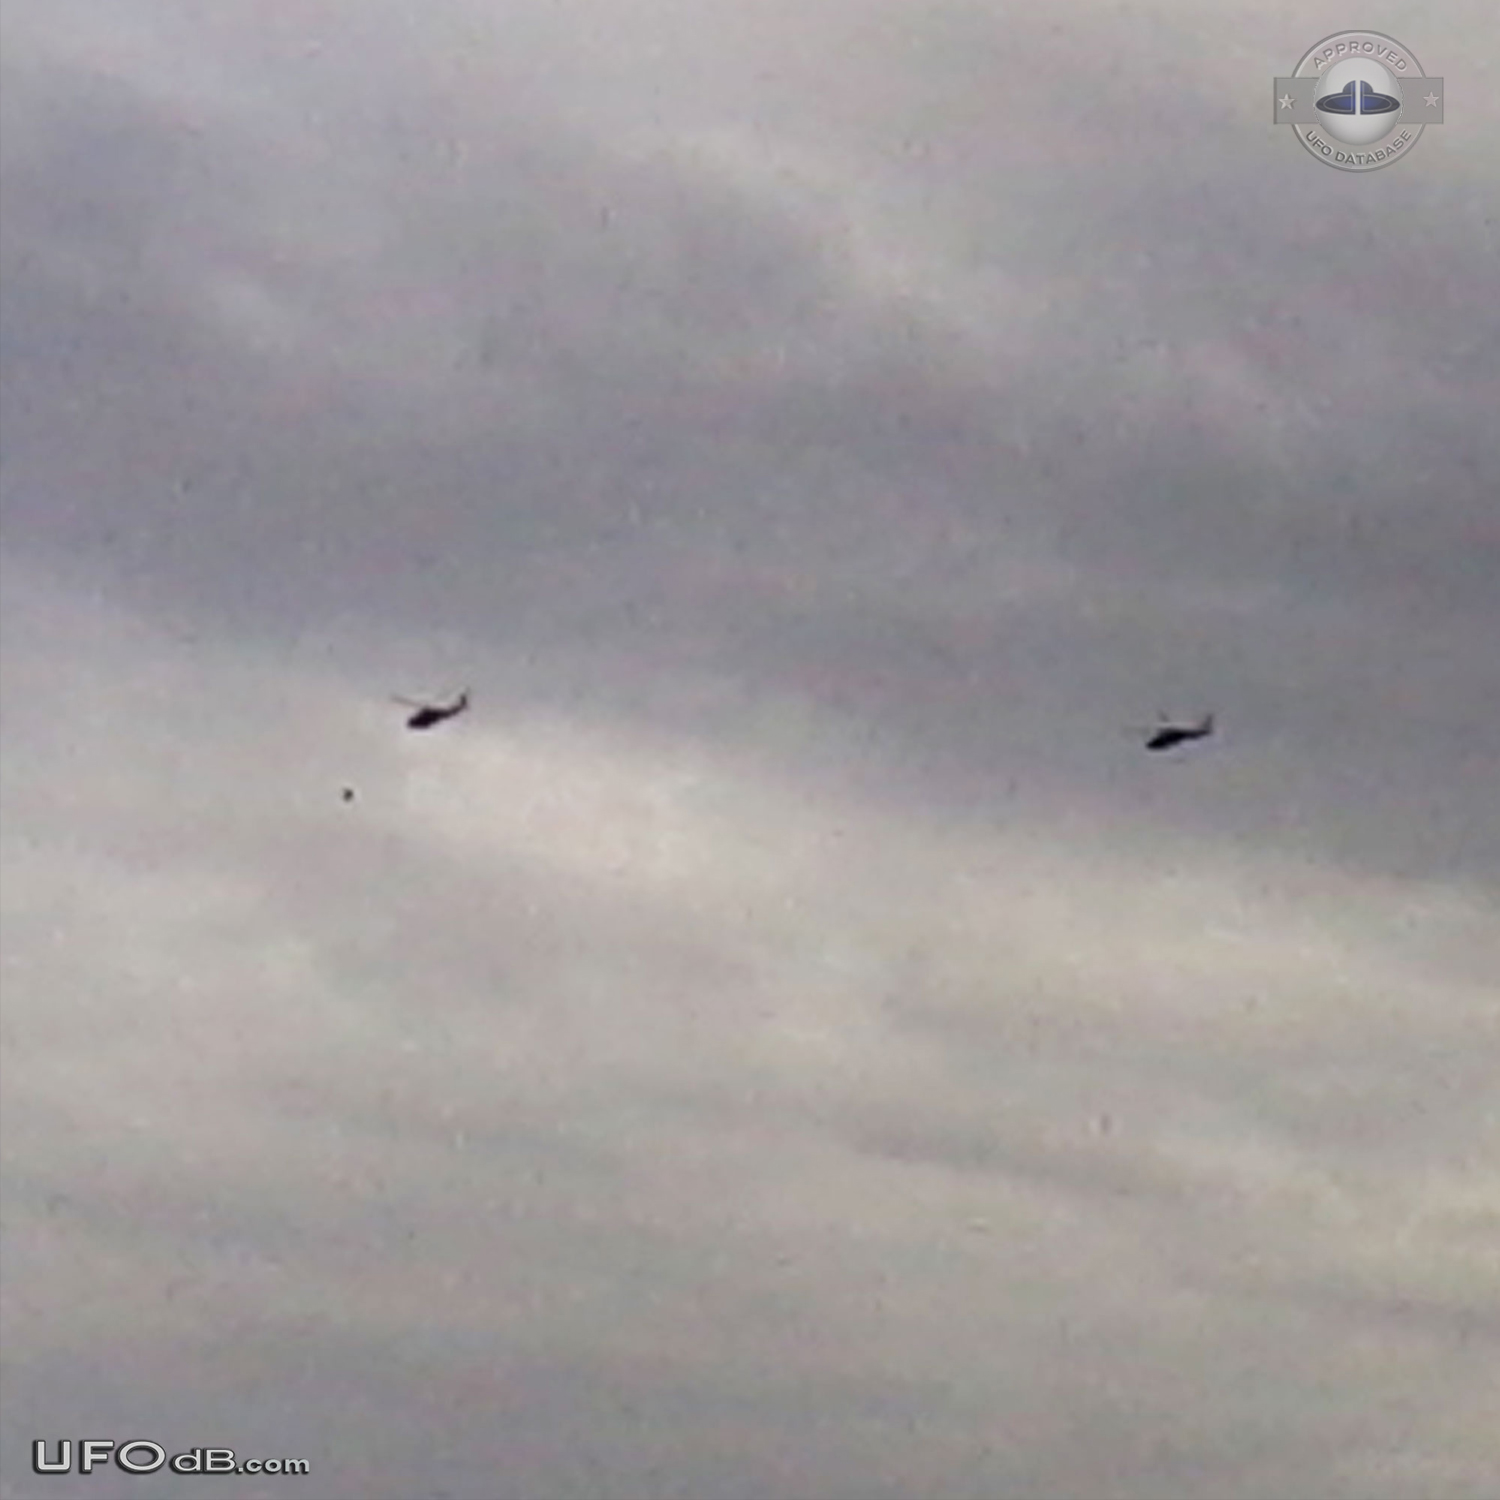 Incredible UFO sighting | 2 helicopters chasing saucer - Illinois 2012 UFO Picture #504-1